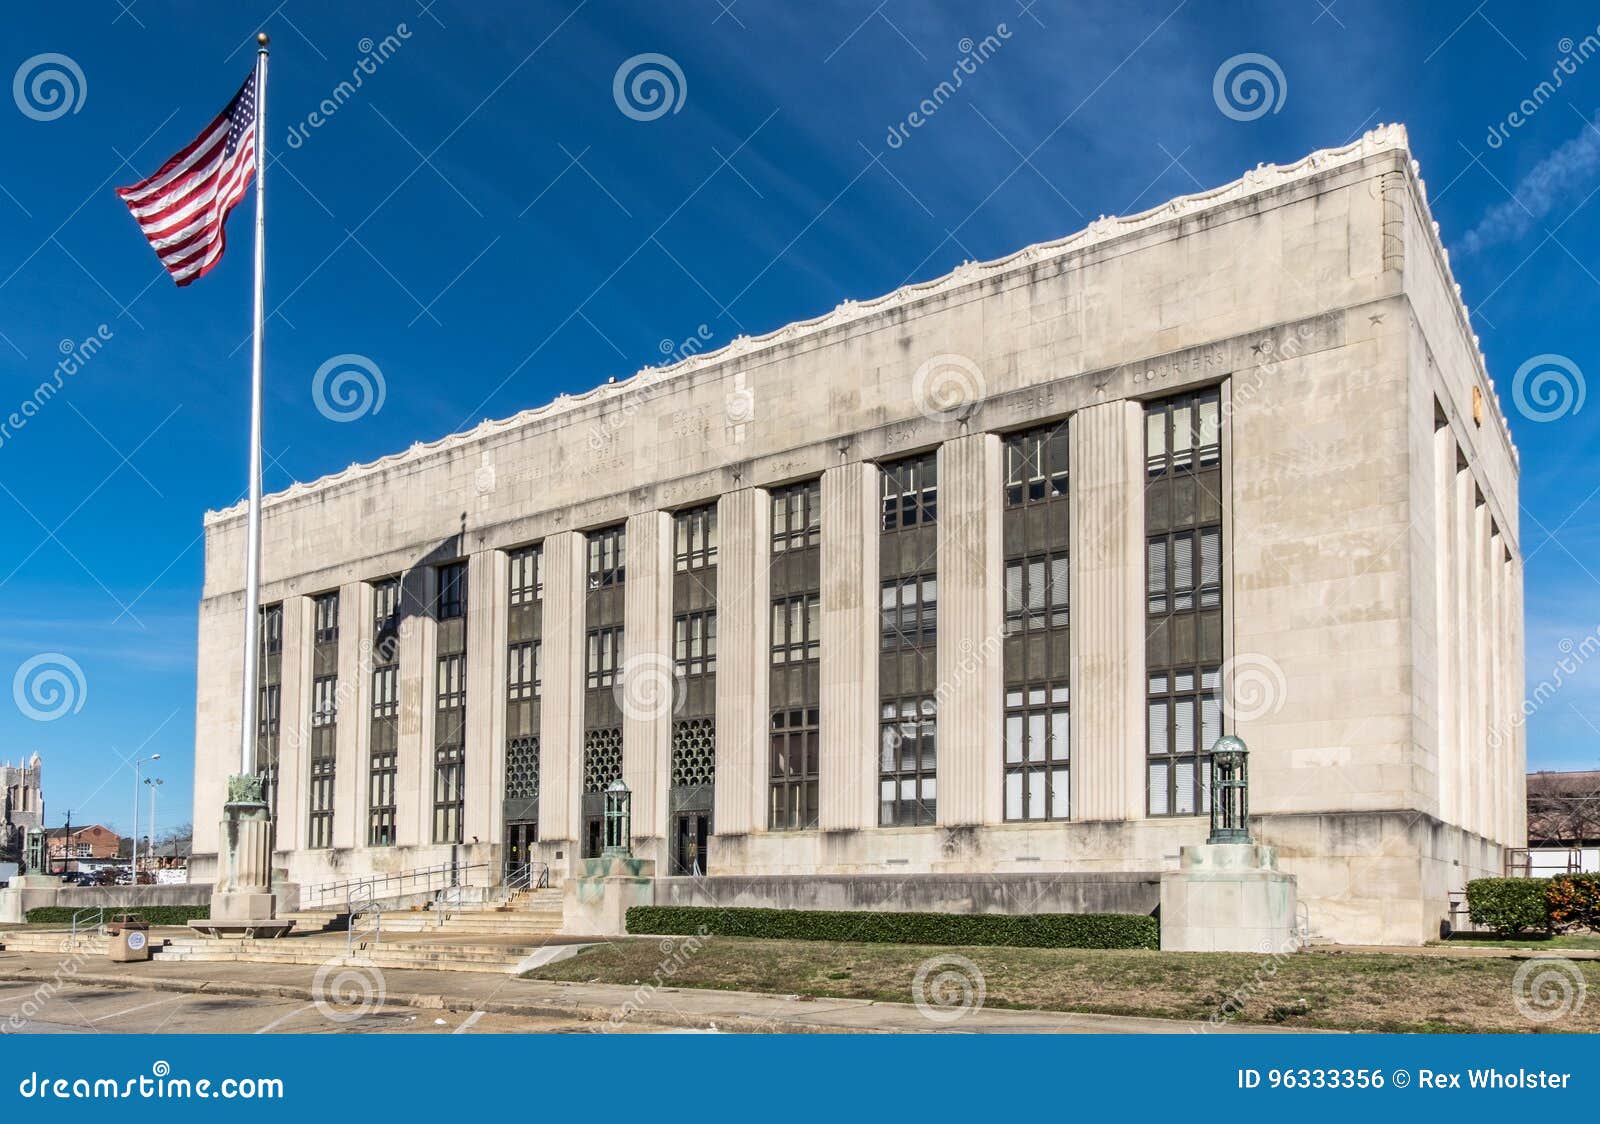 united states district court in meridian mississippi